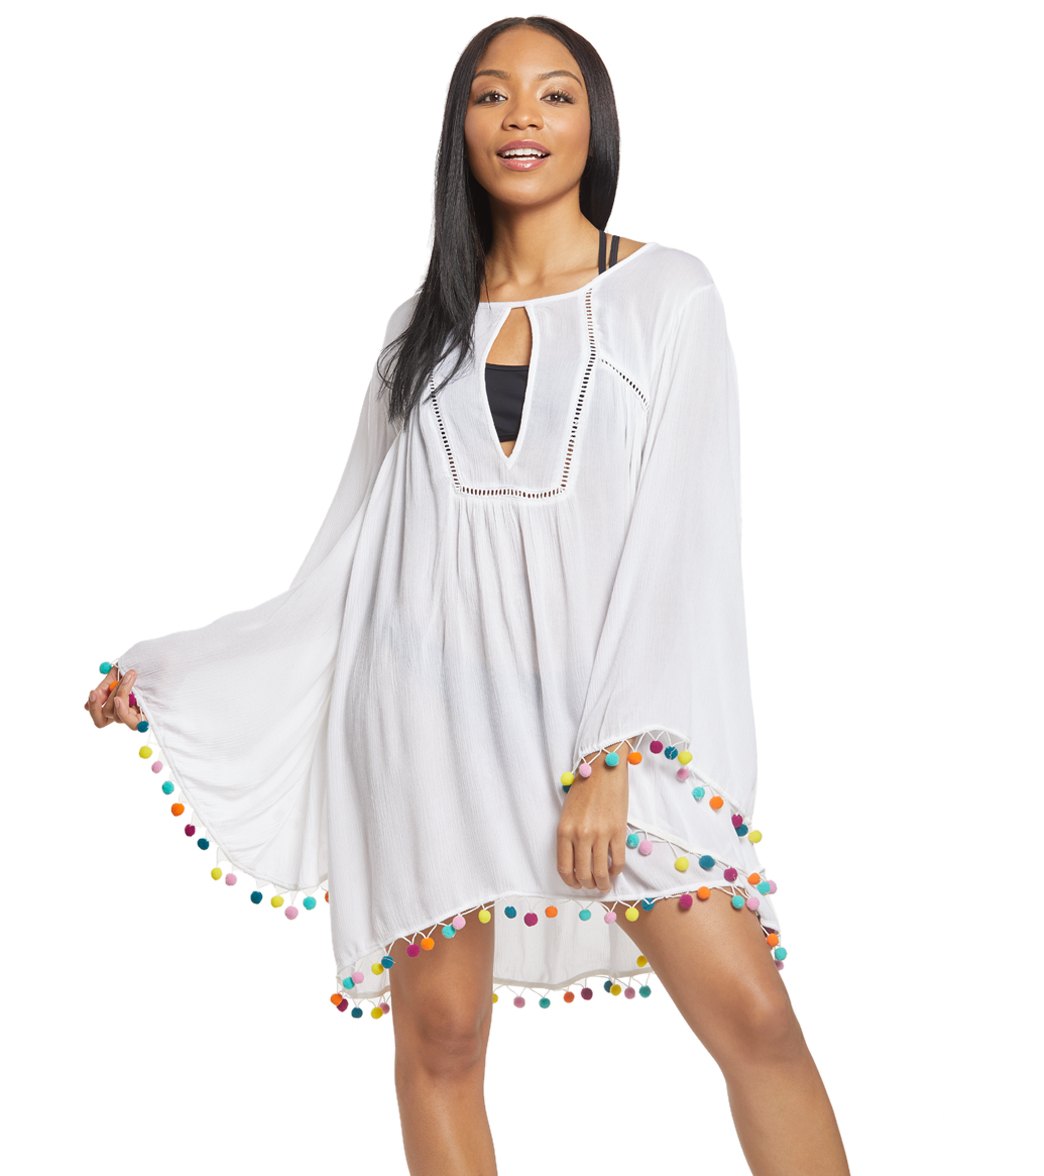 Nanette Lepore Jazzy Pom Cover Up Tunic - White X-Small - Swimoutlet.com